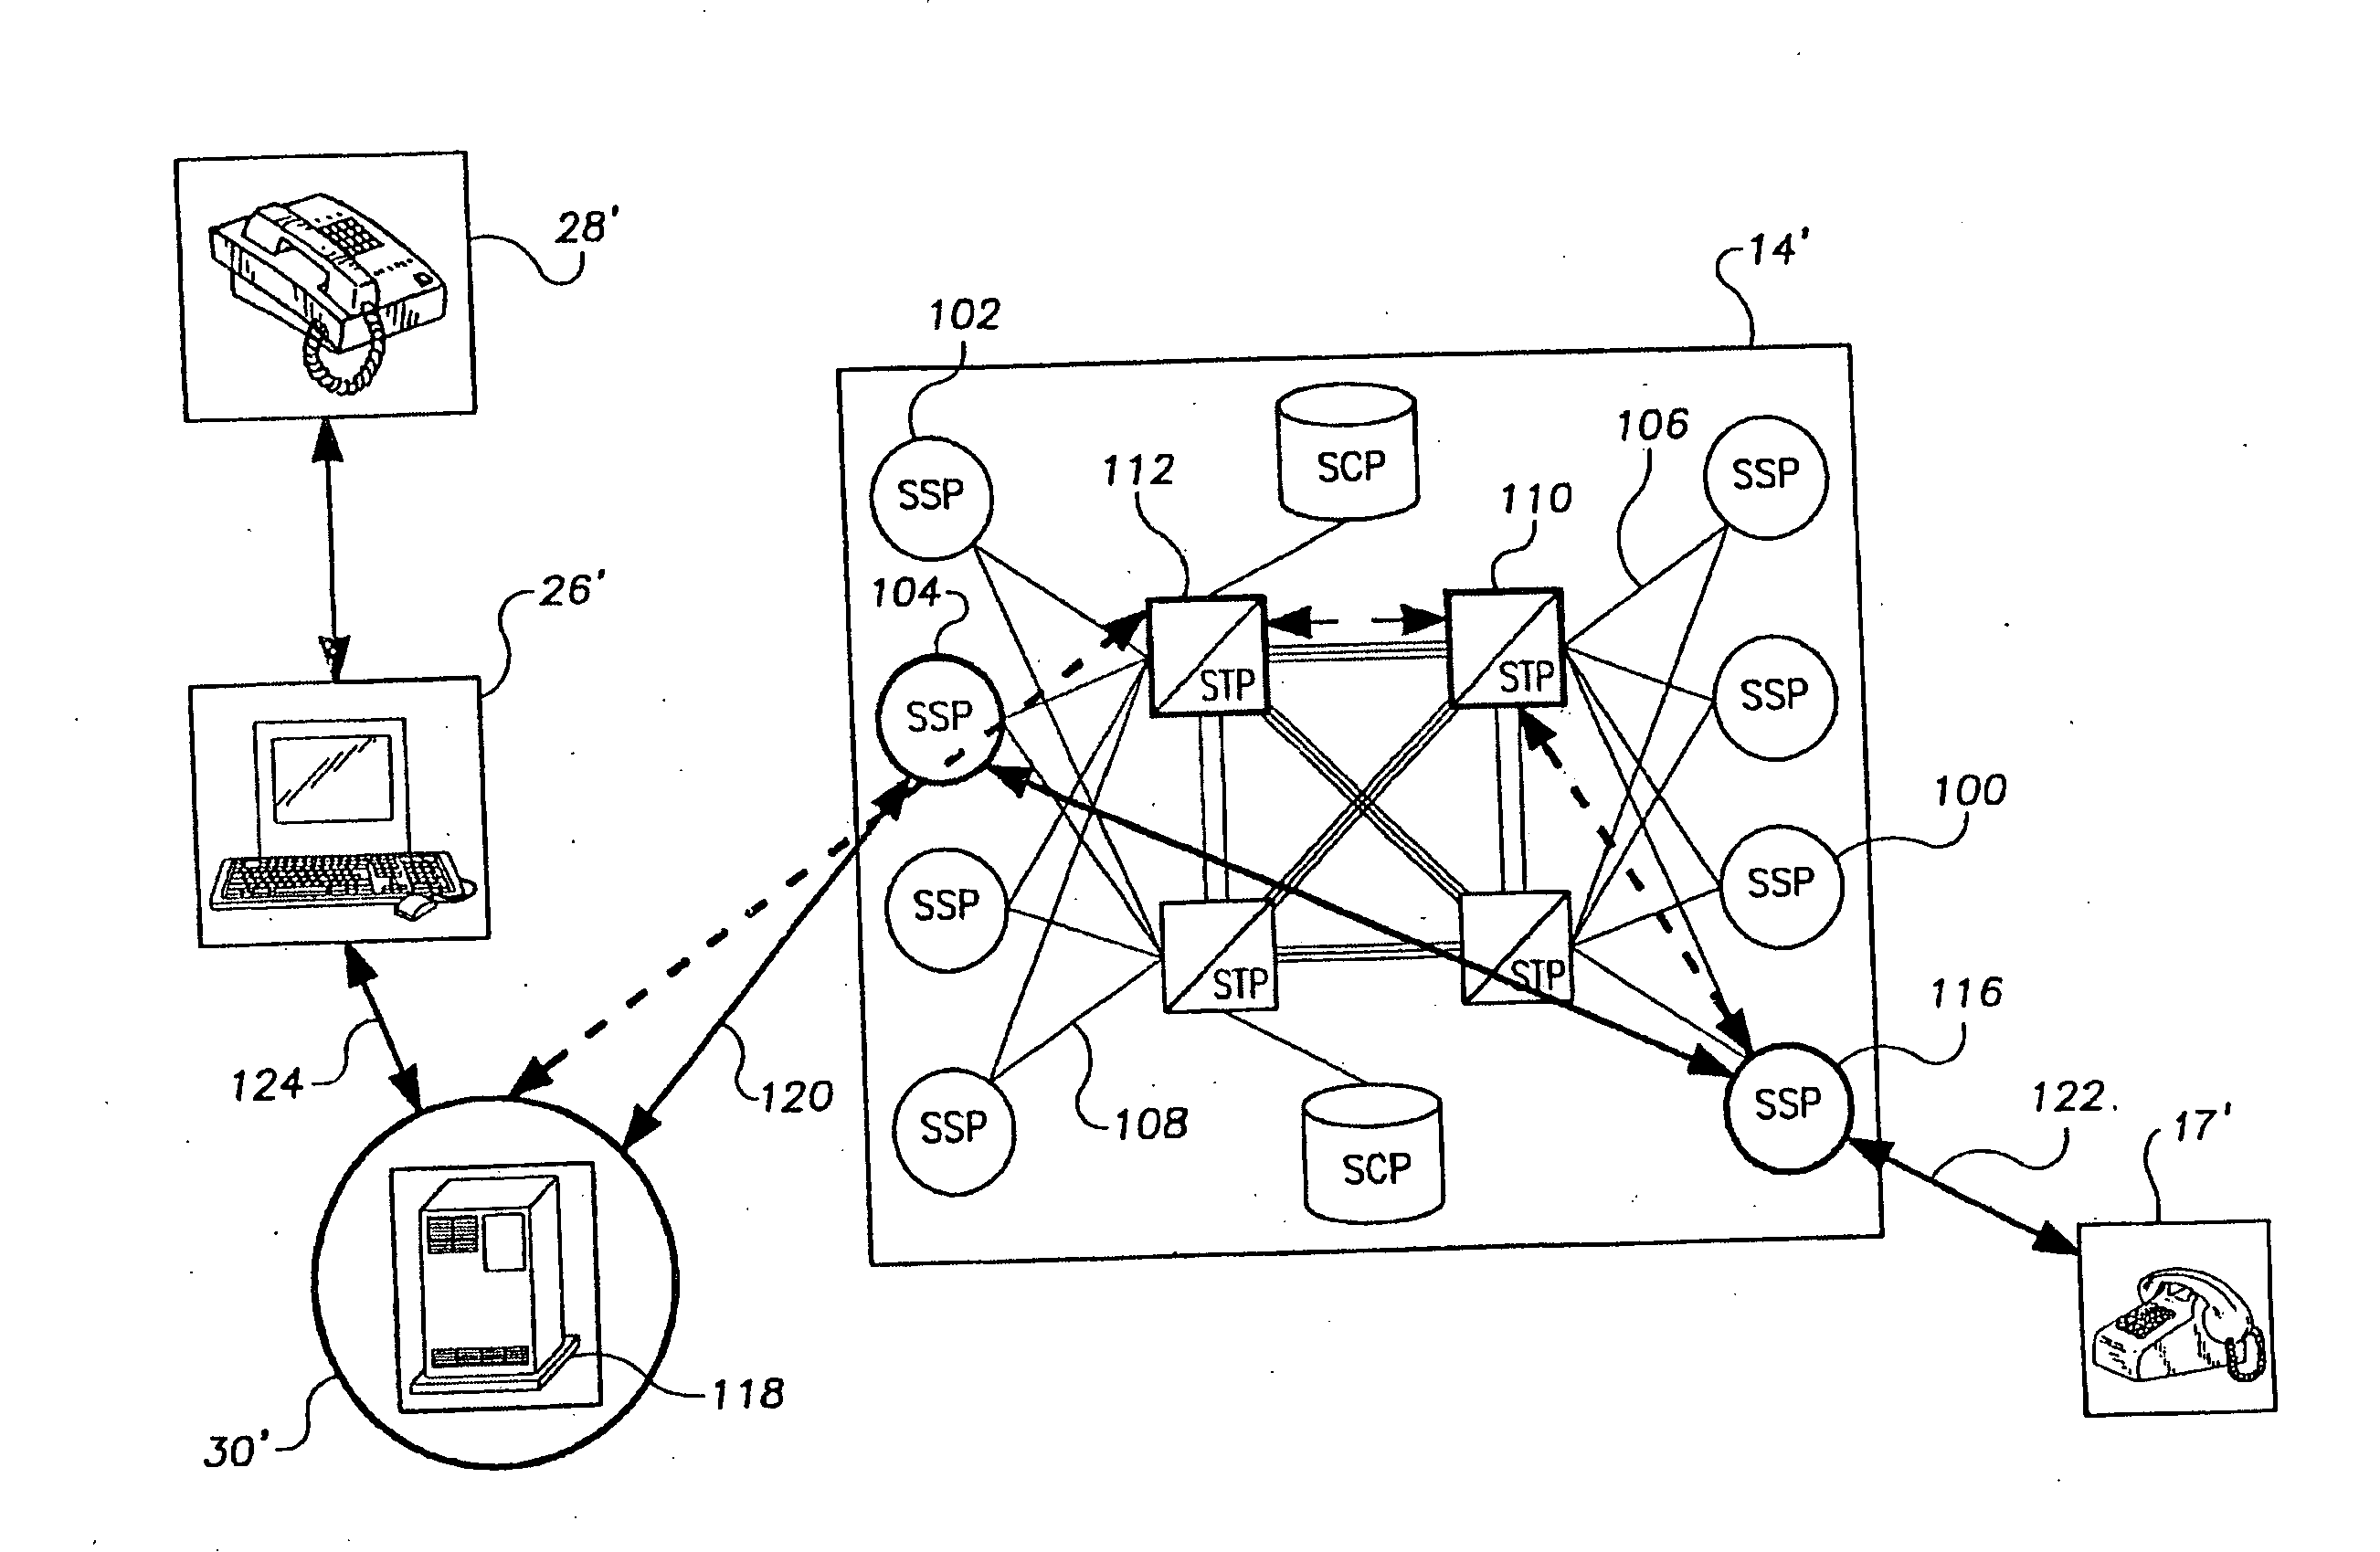 Dial Up Telephone Conferencing System Controlled by an Online Computer Network